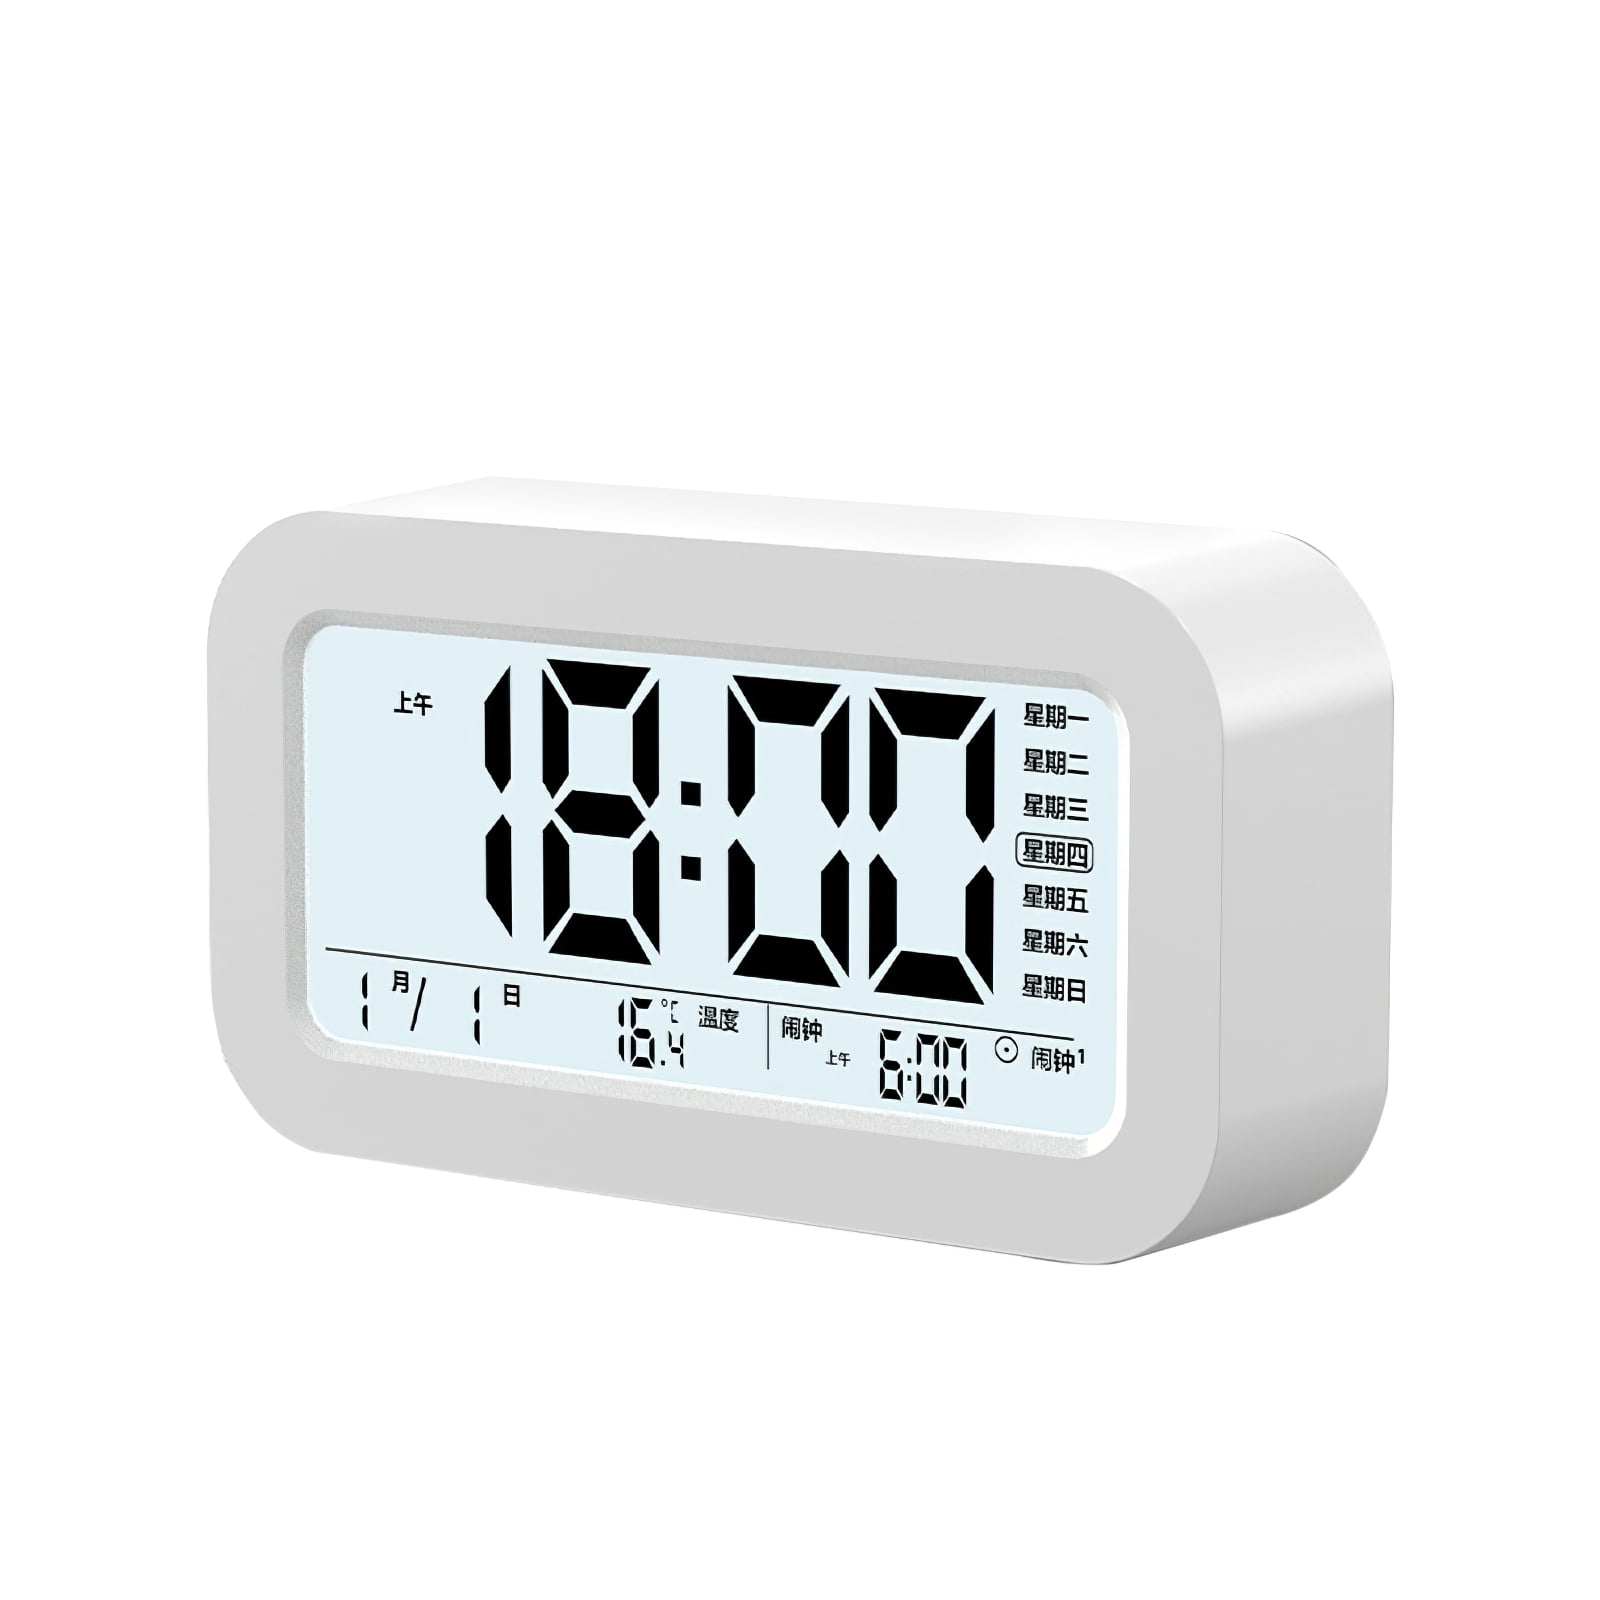 jiemei Alarm Clock Battery Operated Green LCD Large Display Digital Alarm Clocks for Kids and Adults with Snooze Function Smart Backlight 